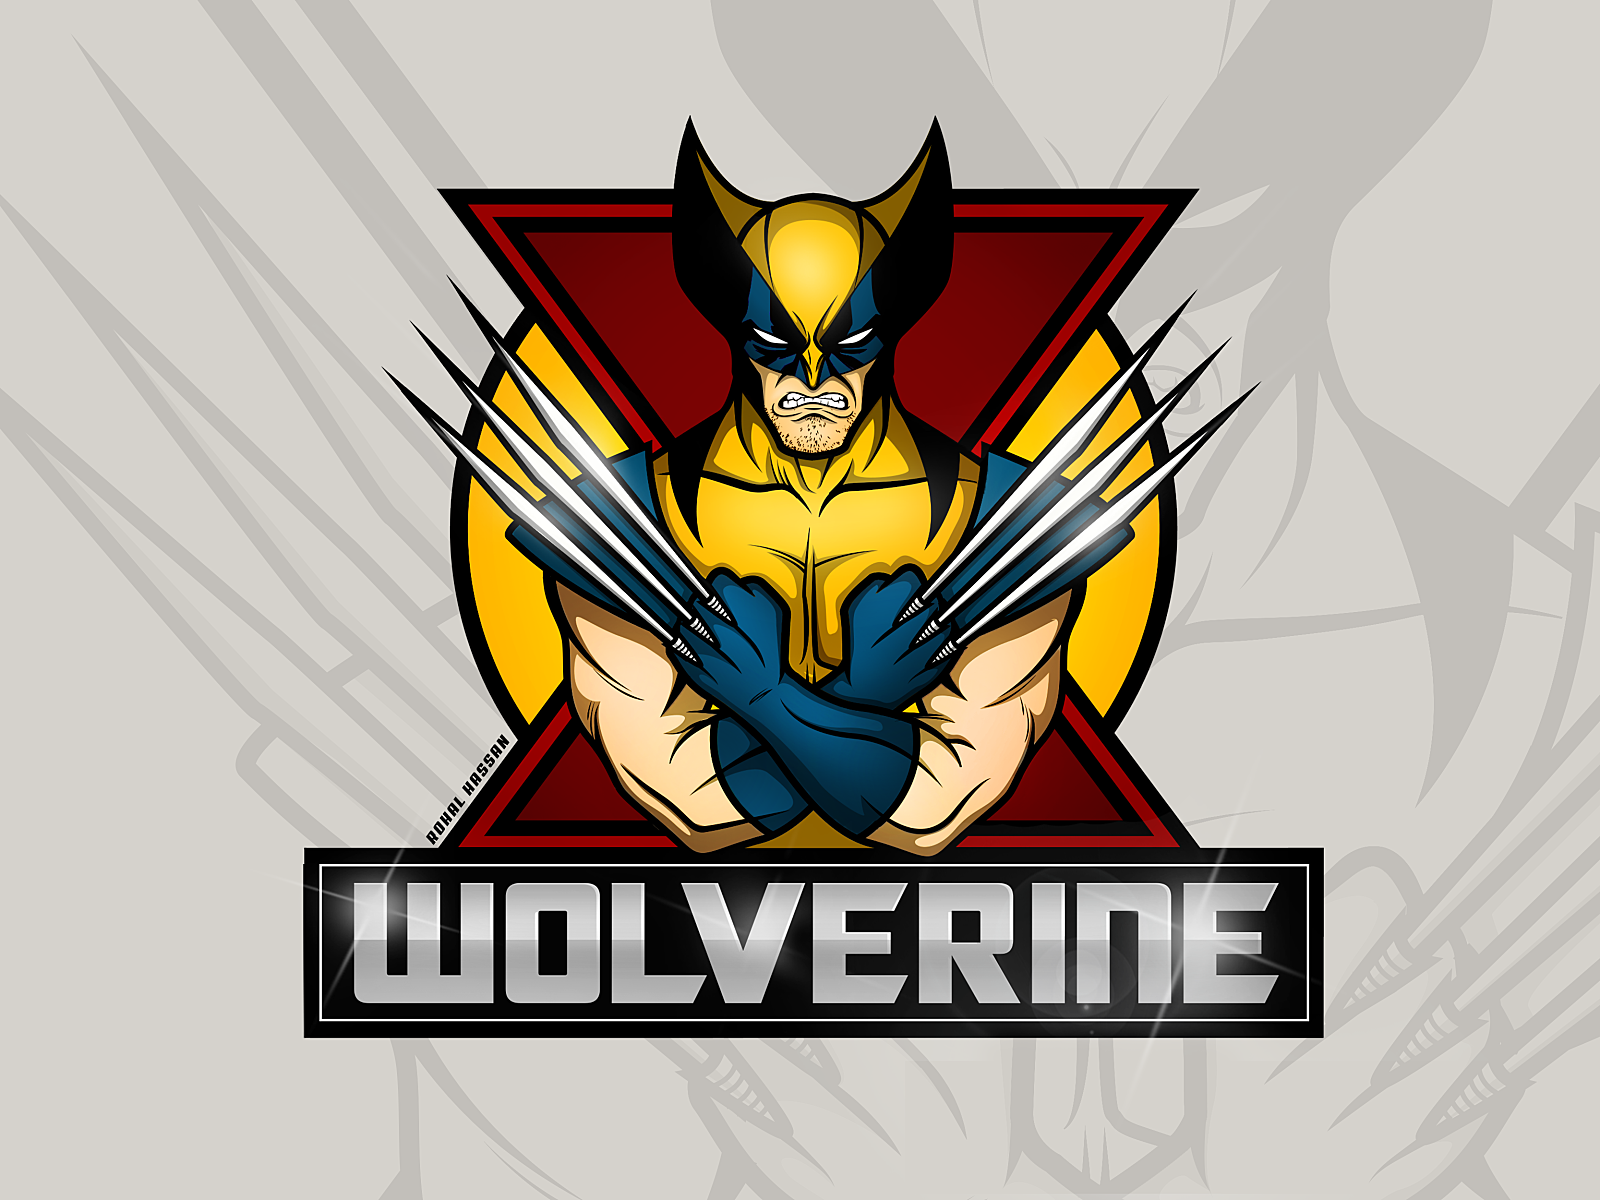 X Men Wolverine Classic Suit Logo By Rohal Hassan On Dribbble